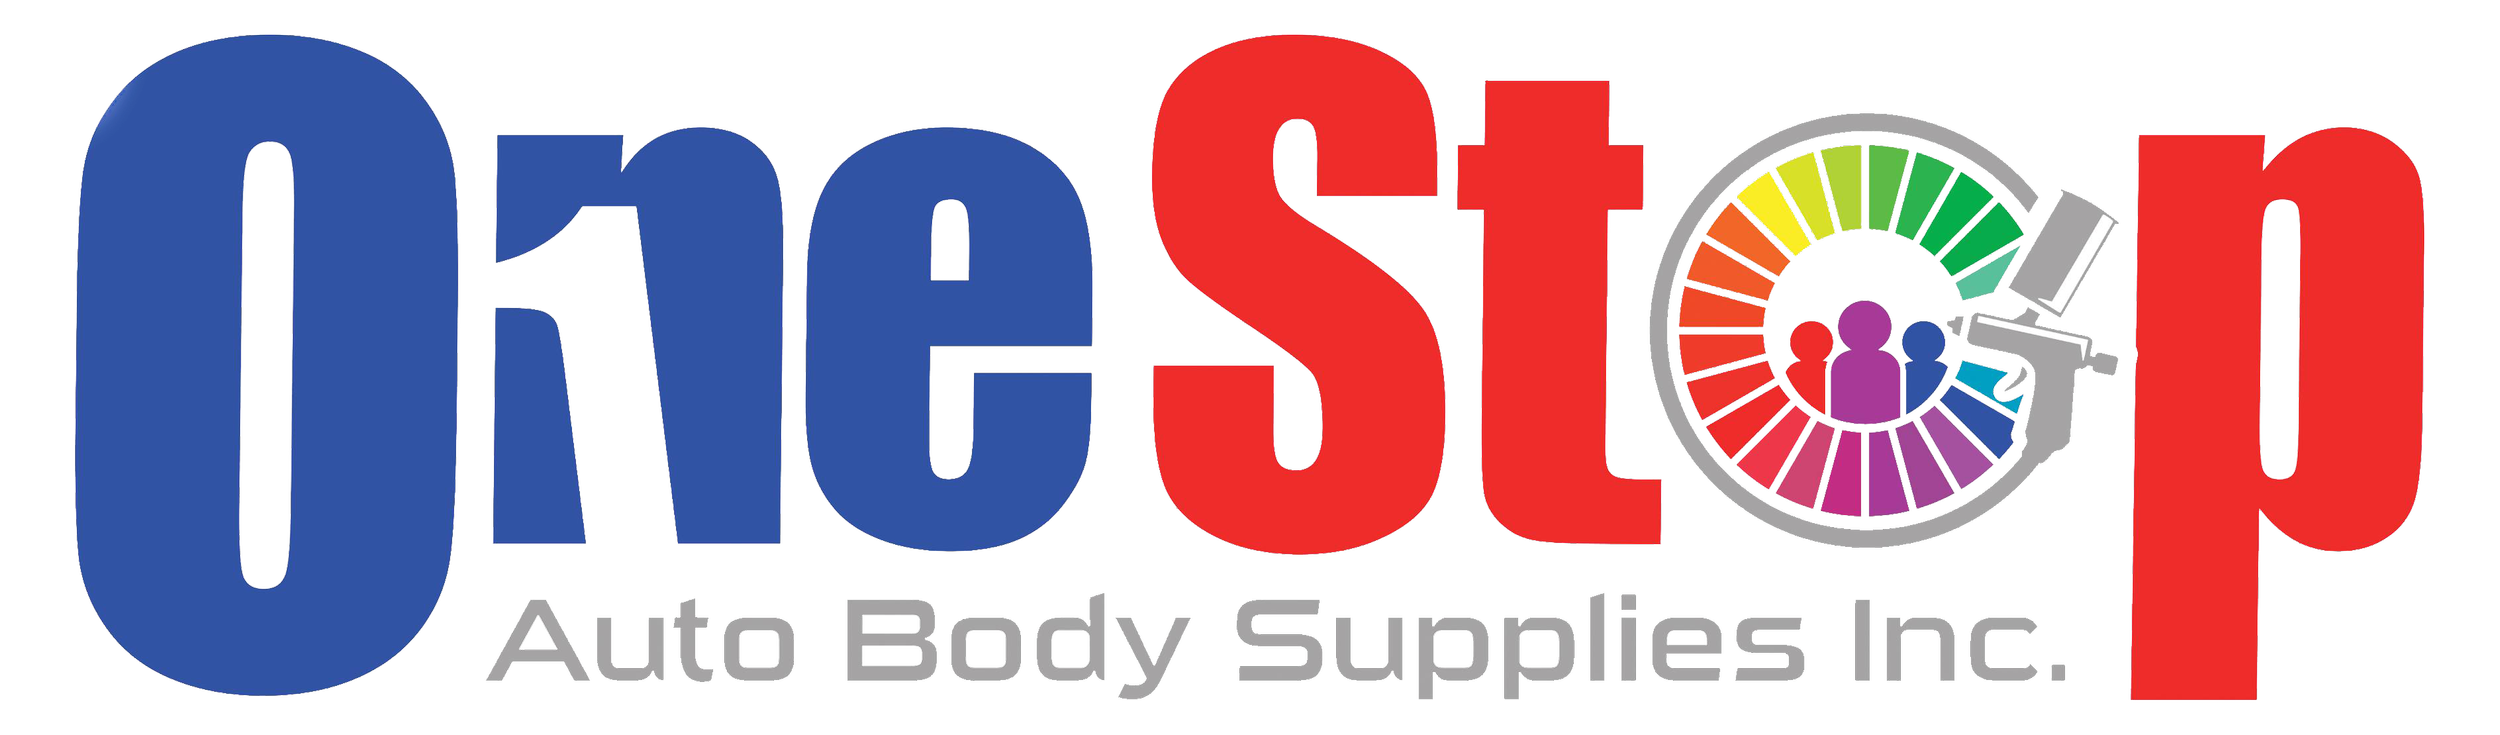 One Stop Auto Body Supplies.png